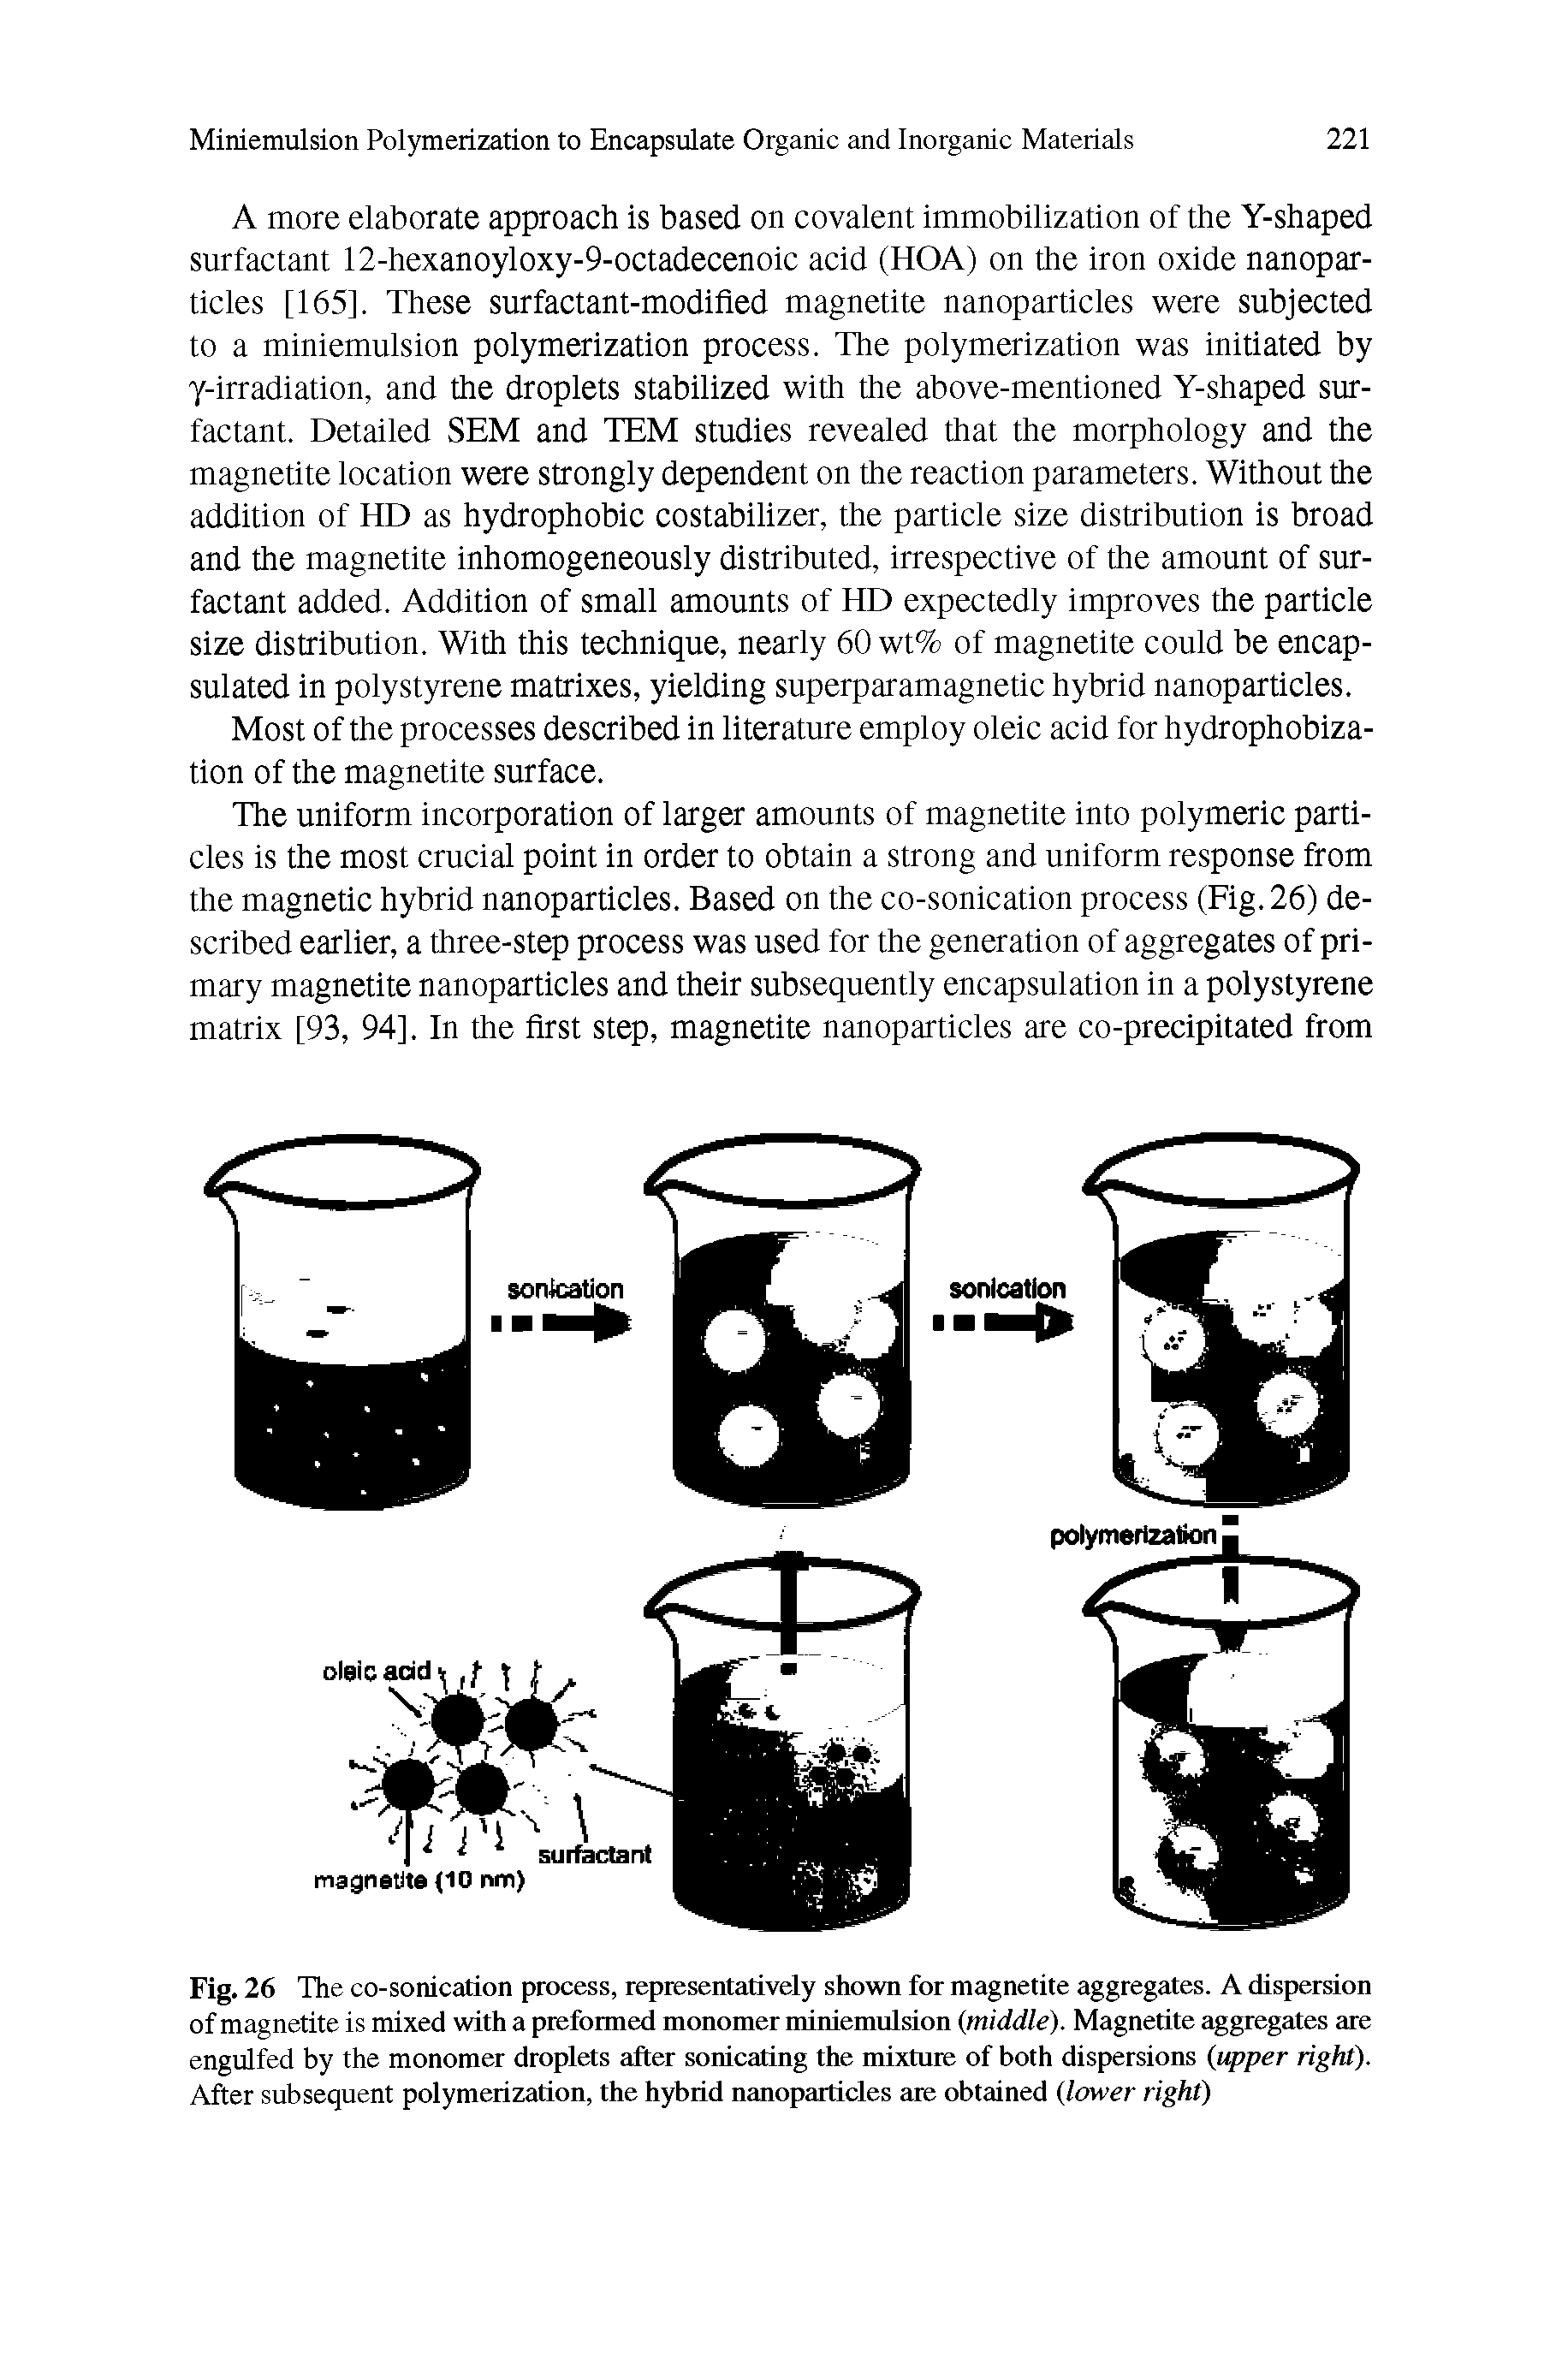 Fig. 26 The co-sonication process, representatively shown for magnetite aggregates. A dispersion of magnetite is mixed with a preformed monomer miniemulsion middle). Magnetite aggregates are engulfed by the monomer droplets after sonicating the mixture of both dispersions upper right). After subsequent polymerization, the hybrid nanoparticles are obtained lower right)...